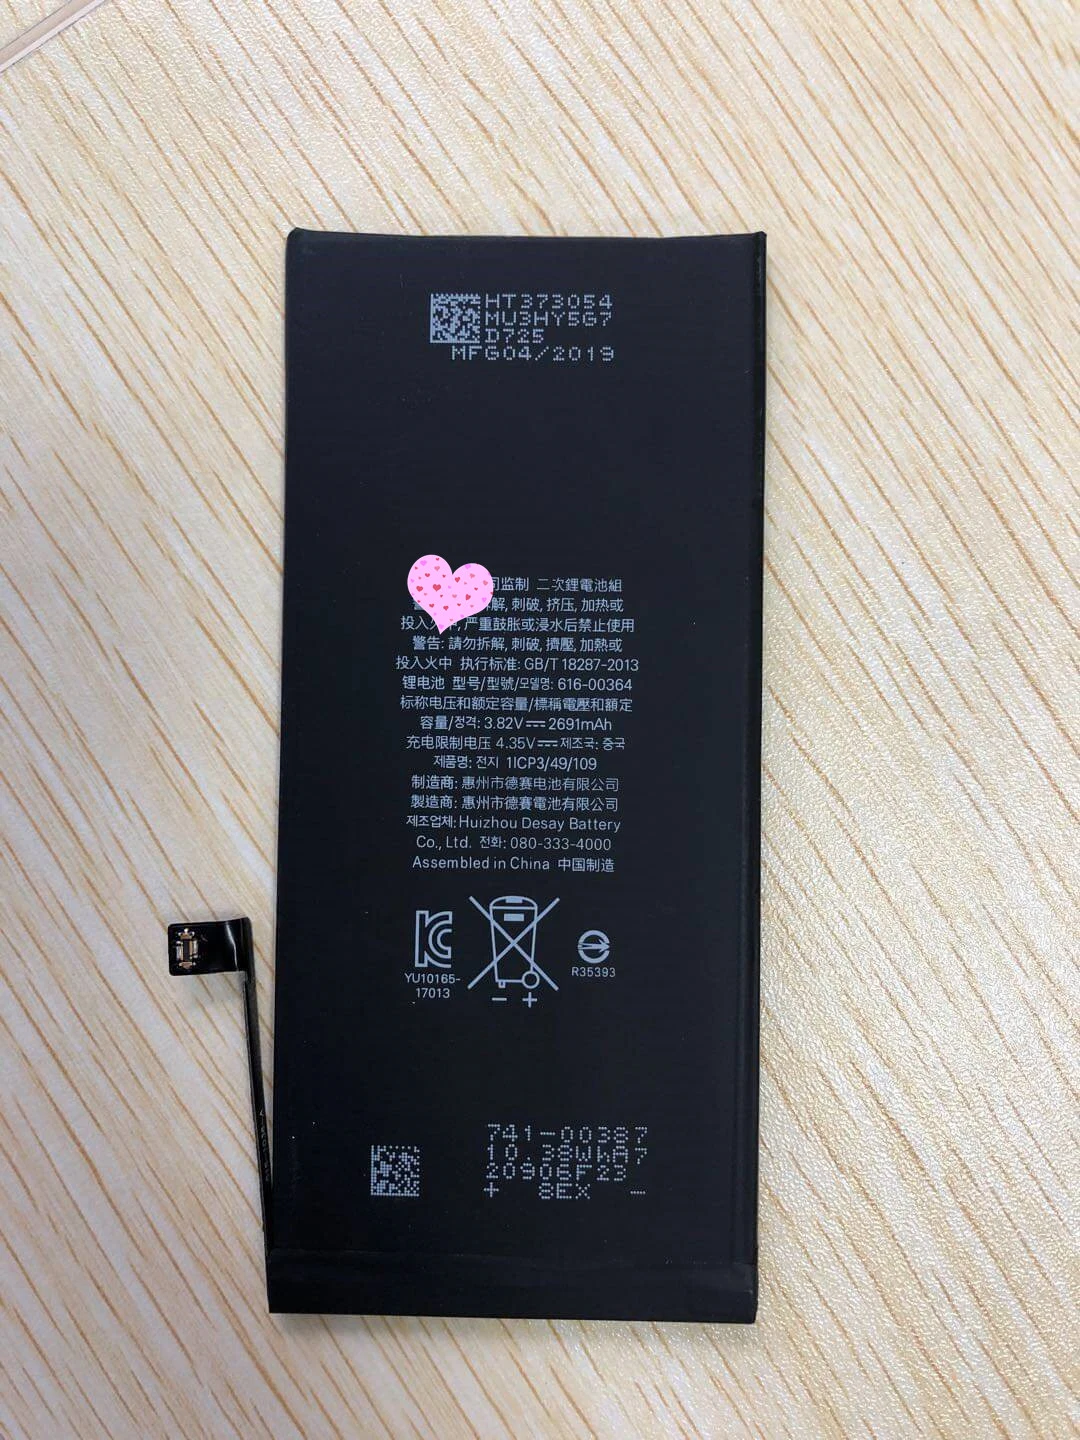 Original Phone Li-on Battery 100% New Phone Condition for iPhone 13, 7, 8, X, 11